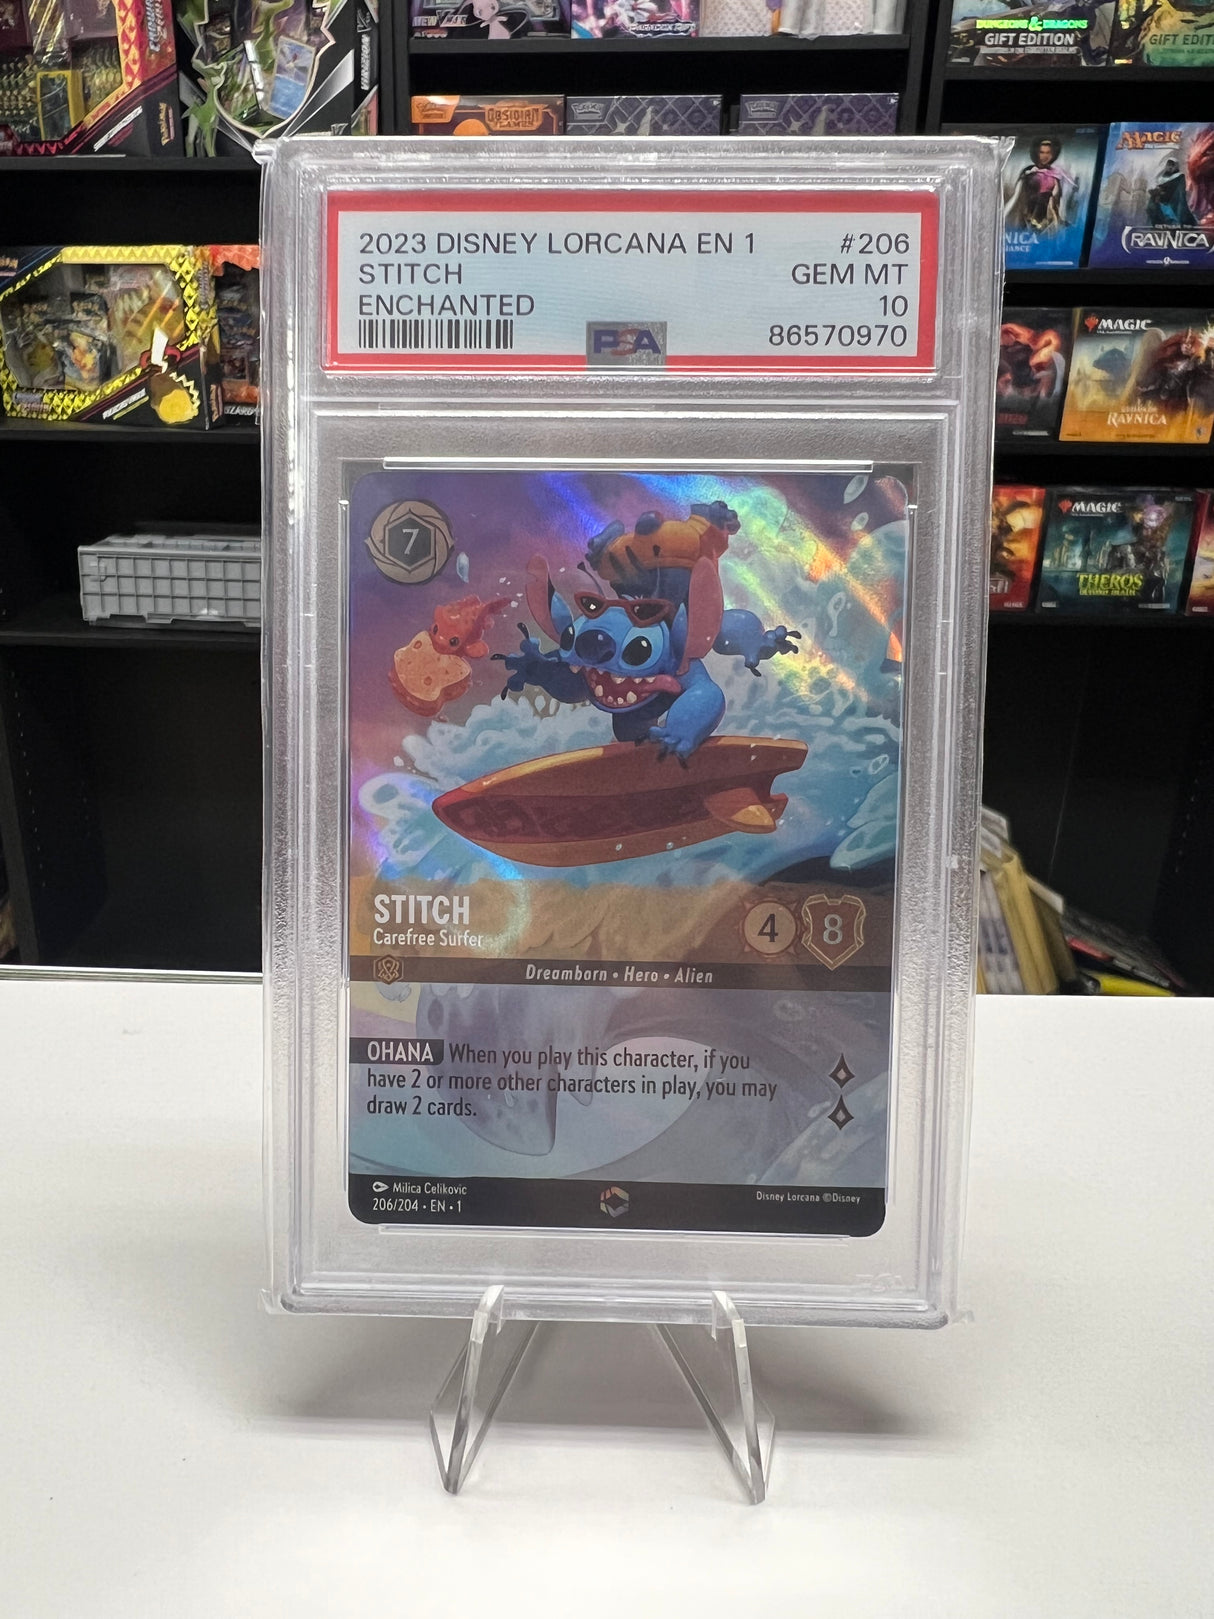 Stitch - Carefree Surfer - [Foil, Enchanted, Graded PSA 10] The First Chapter (1)